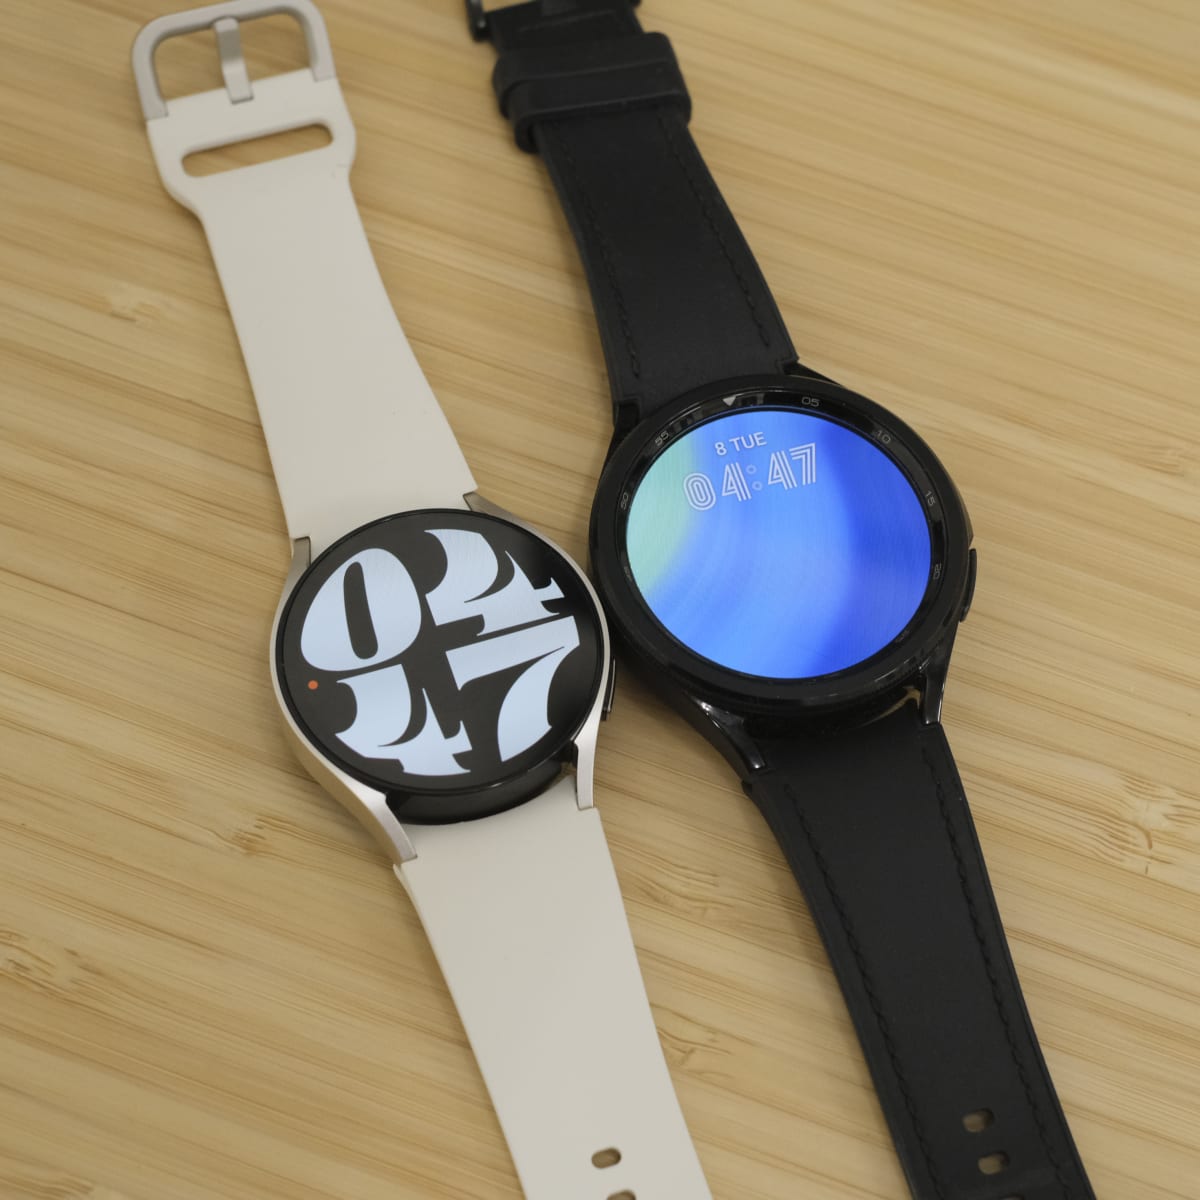 Samsung Galaxy Watch 6 Classic – 43mm and 47mm, Best Price